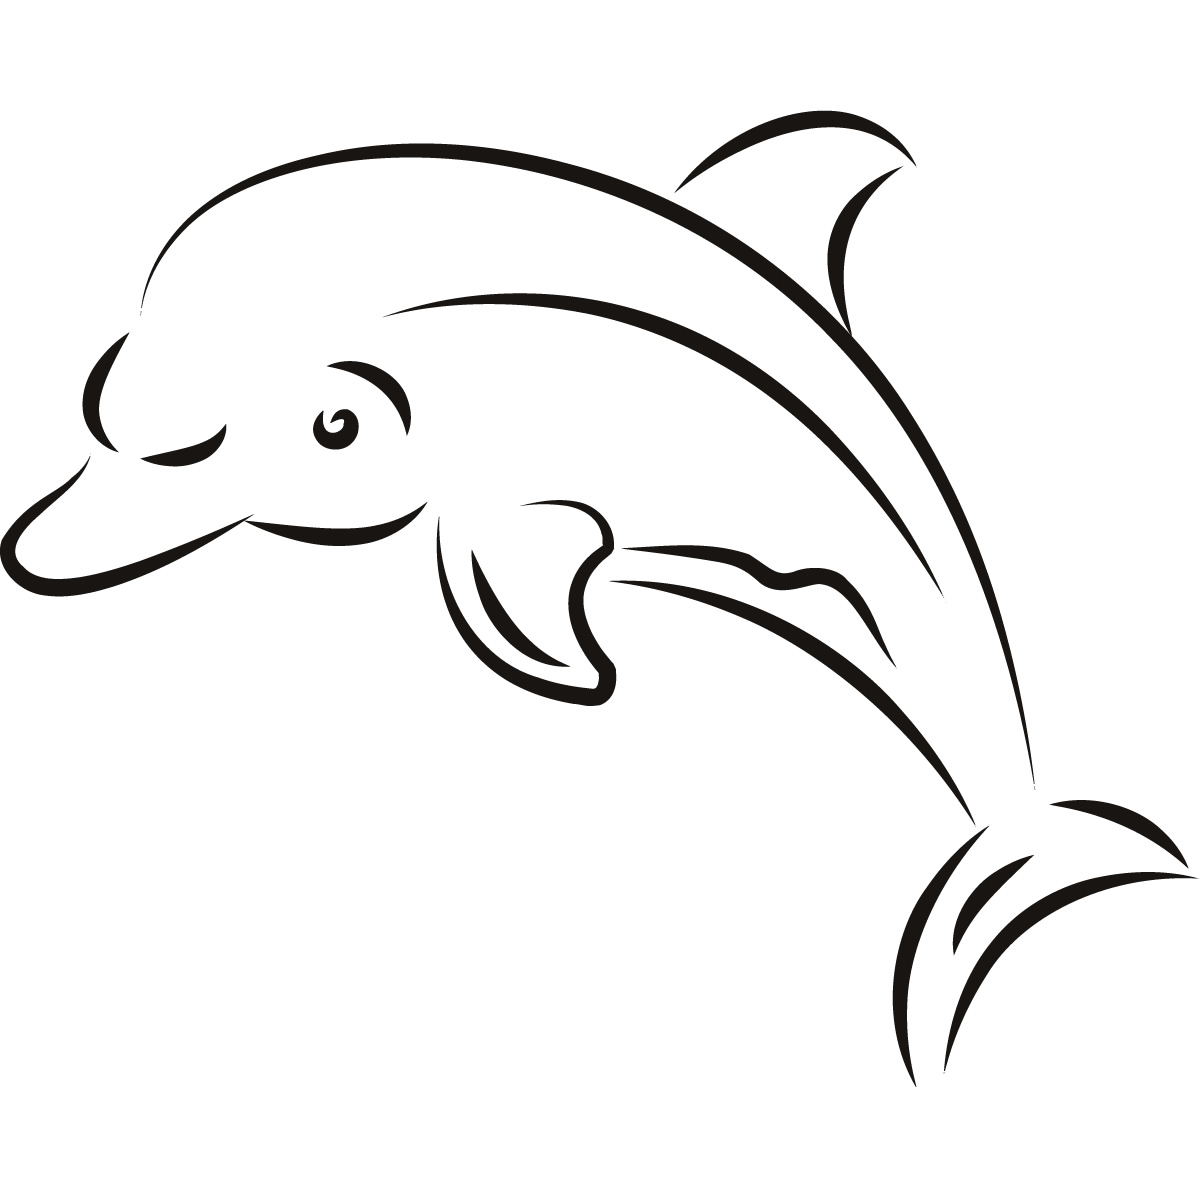 Dolphin outline clipart